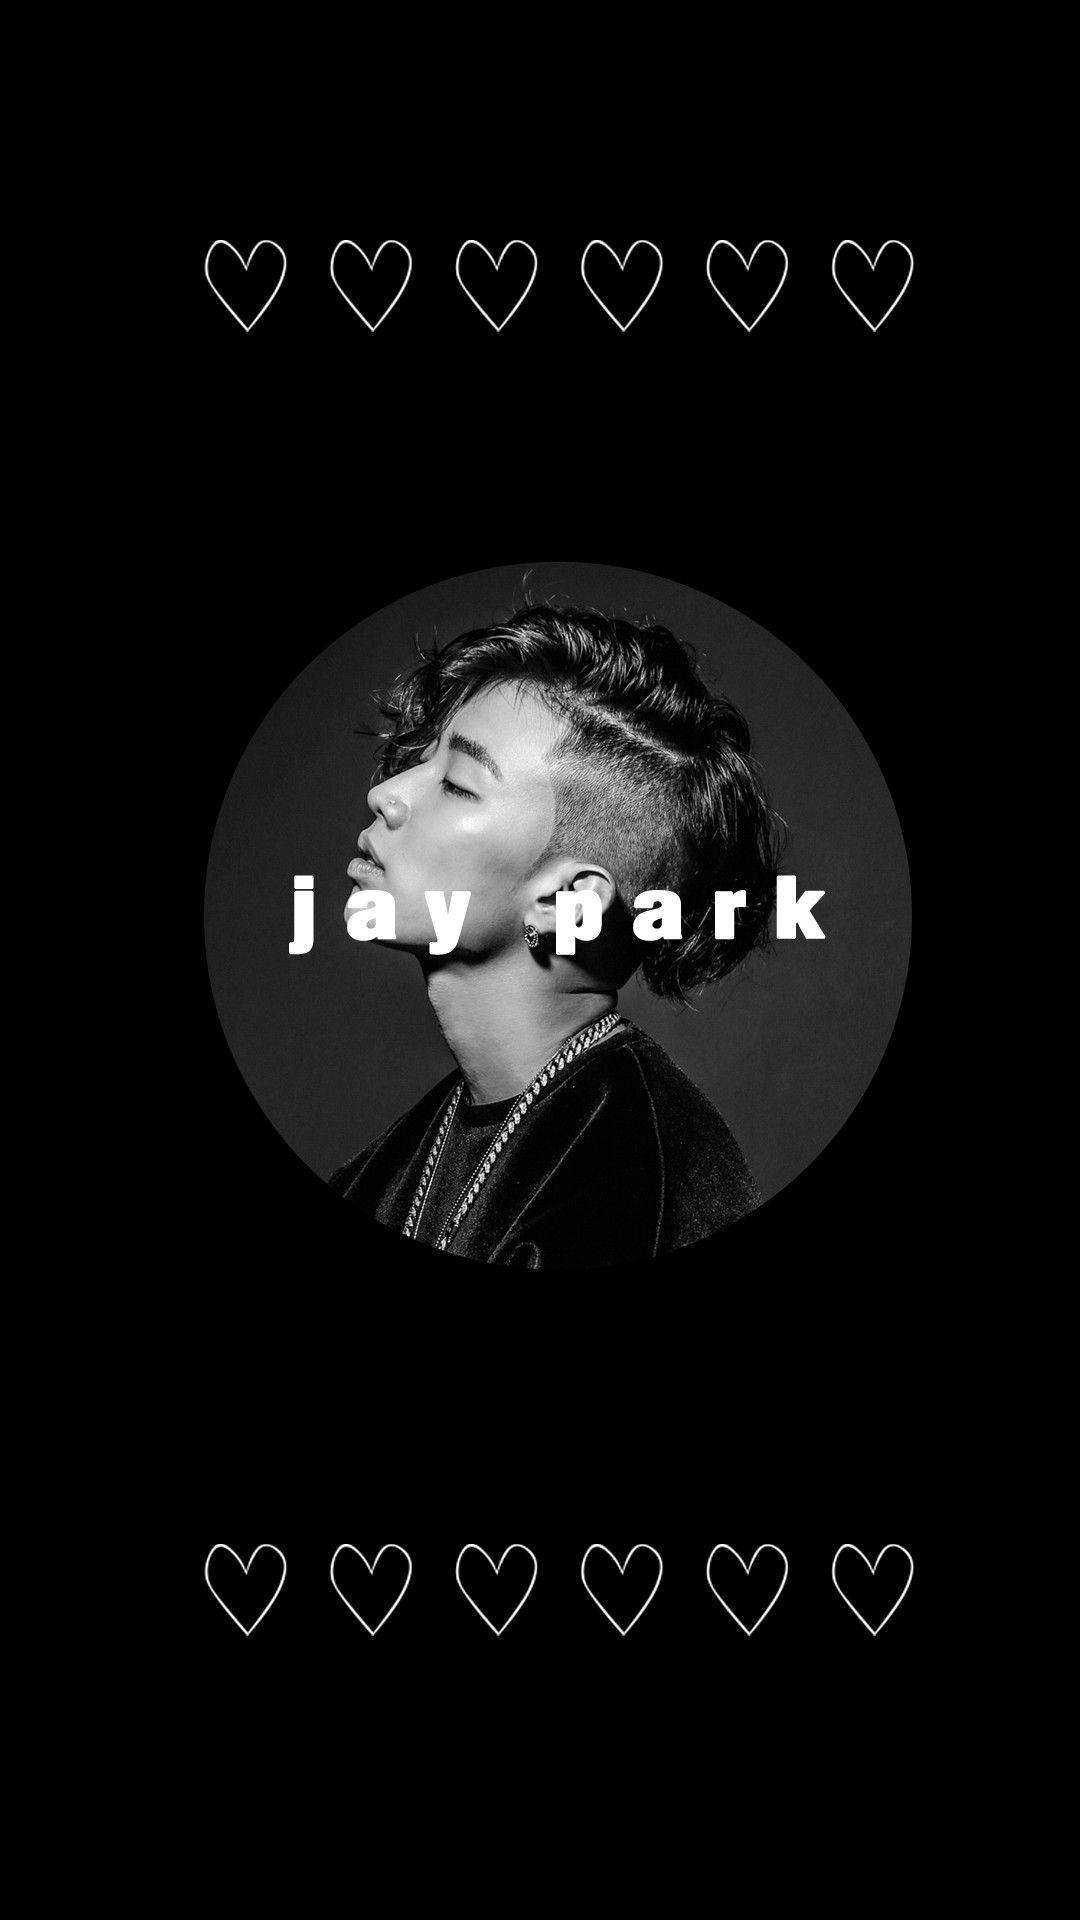 A black and white image of Jay Park with a heart border - Black